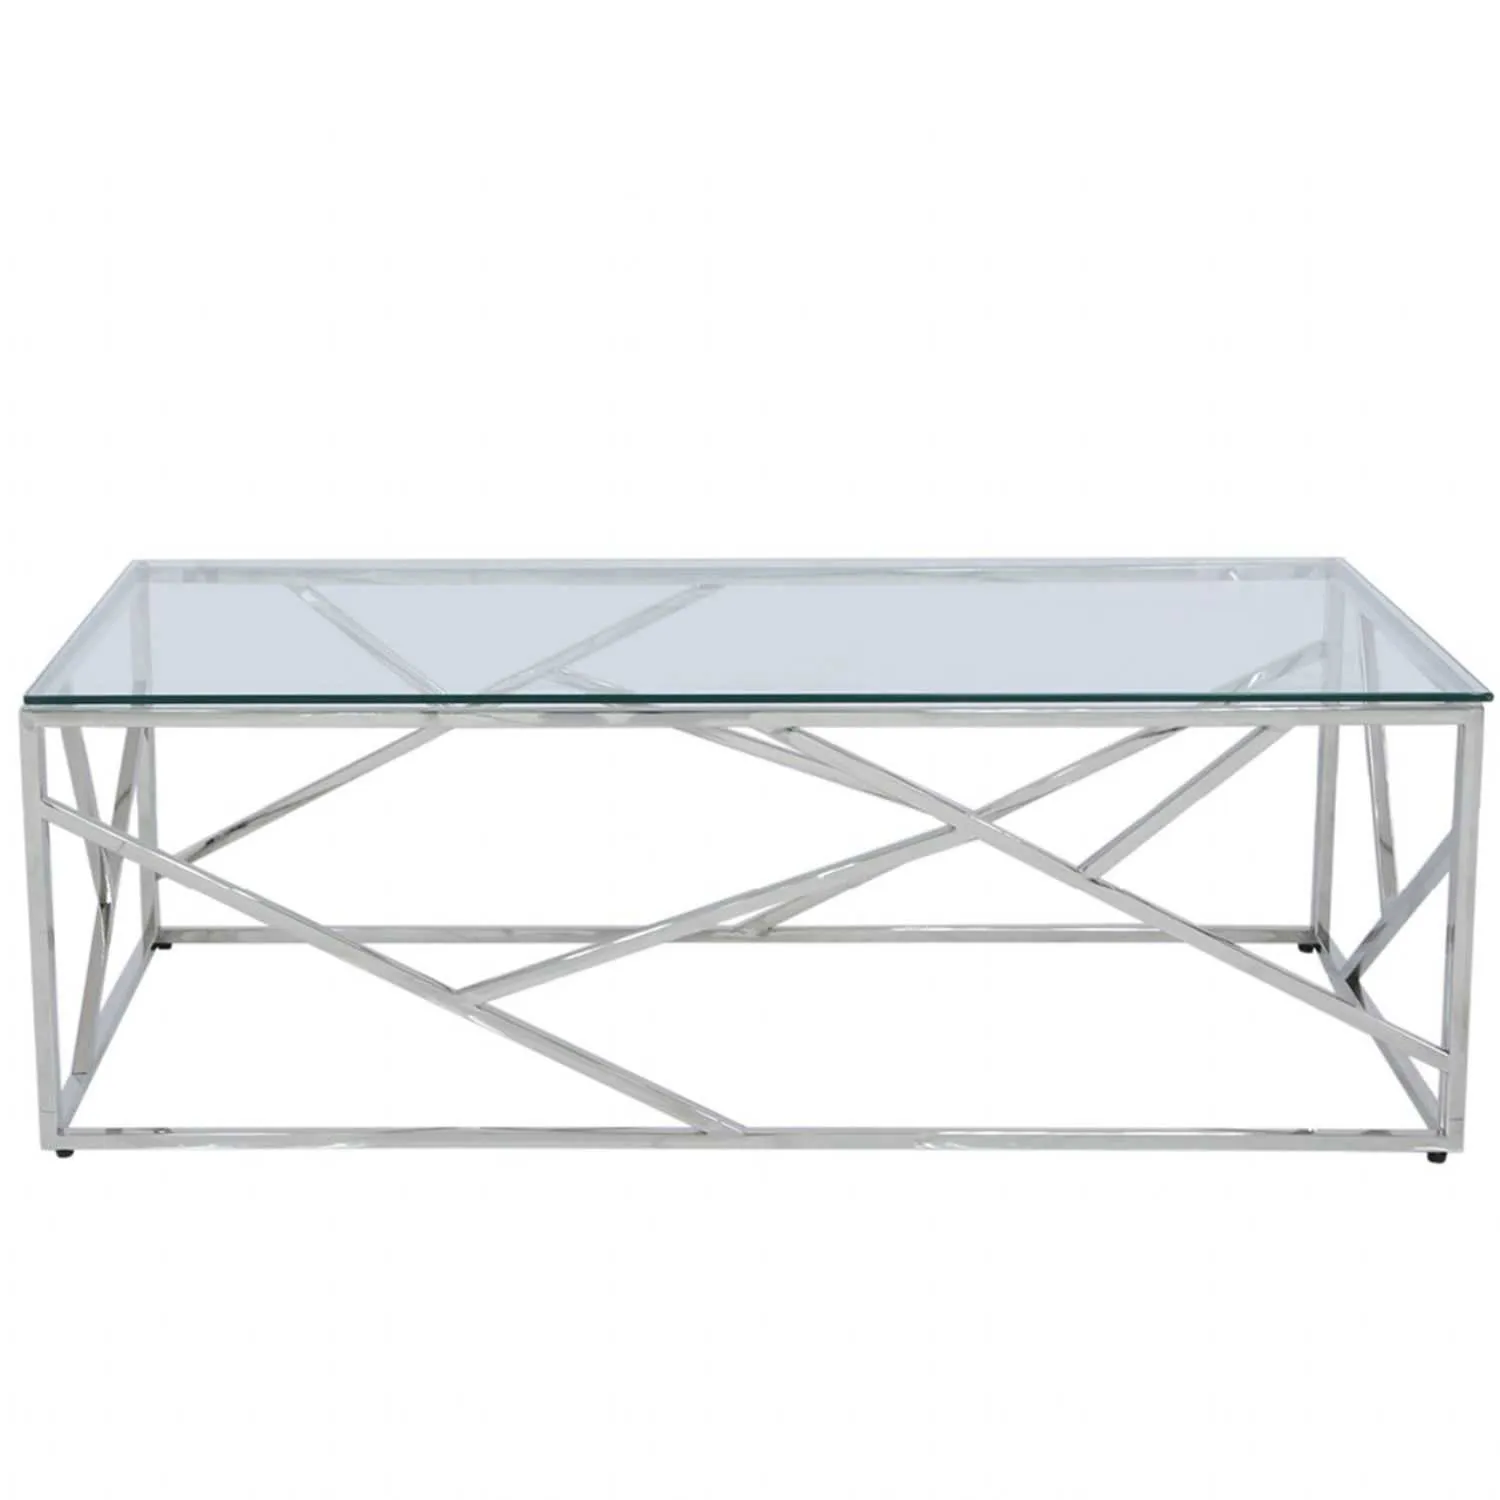 Ajax Stainless Steel Coffee Table Glass Top